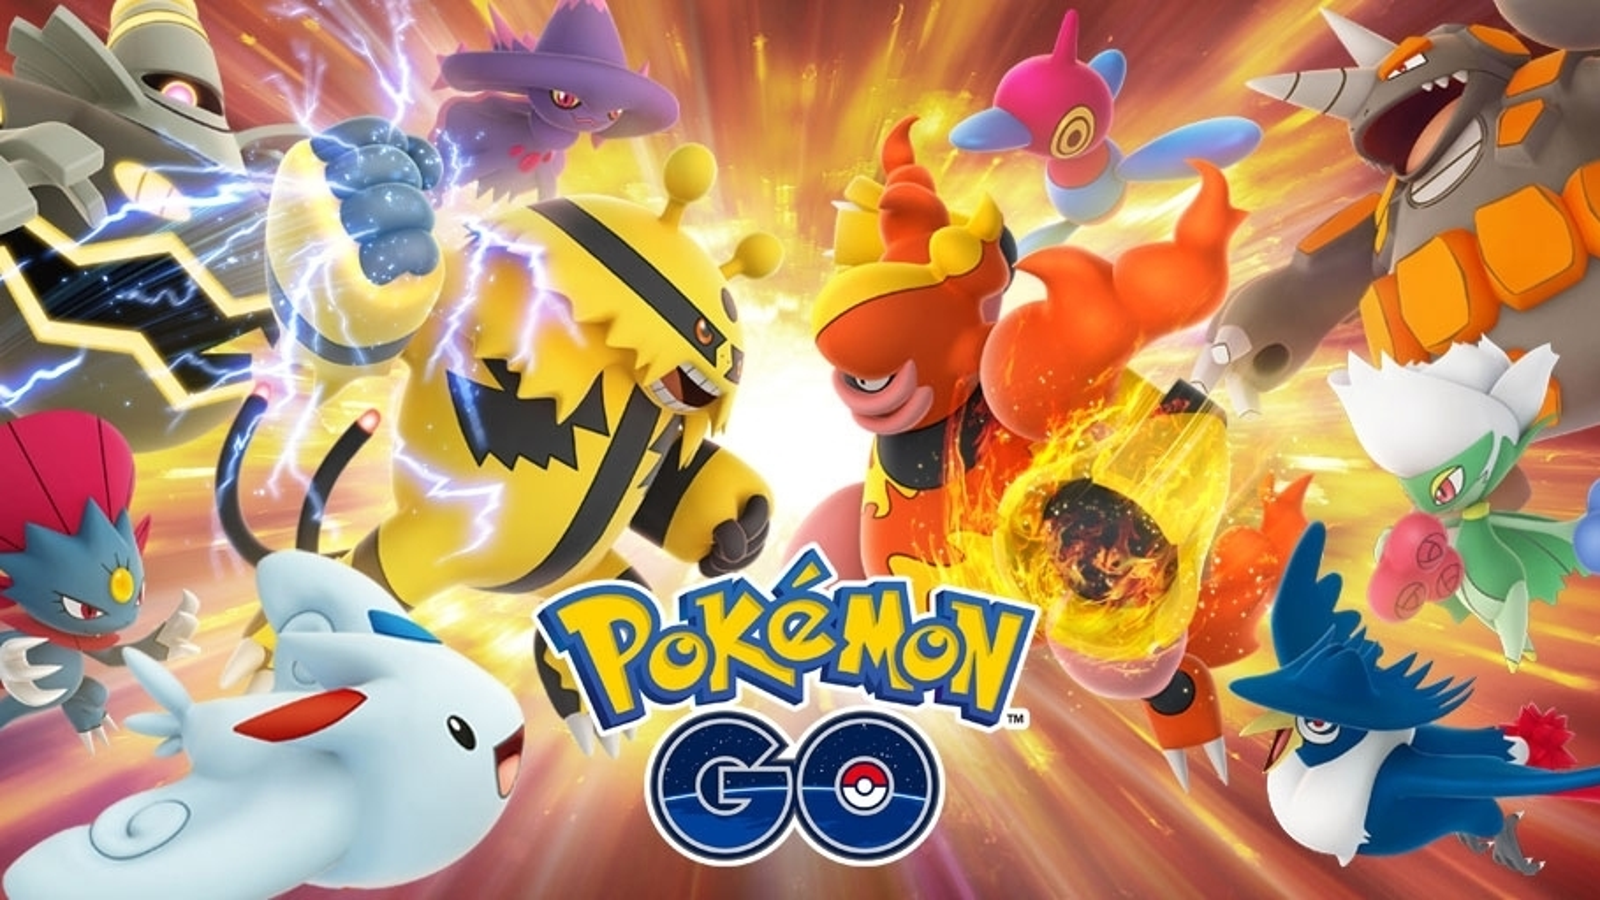 Pokémon Go Battle League leaderboards, special Marill event coming